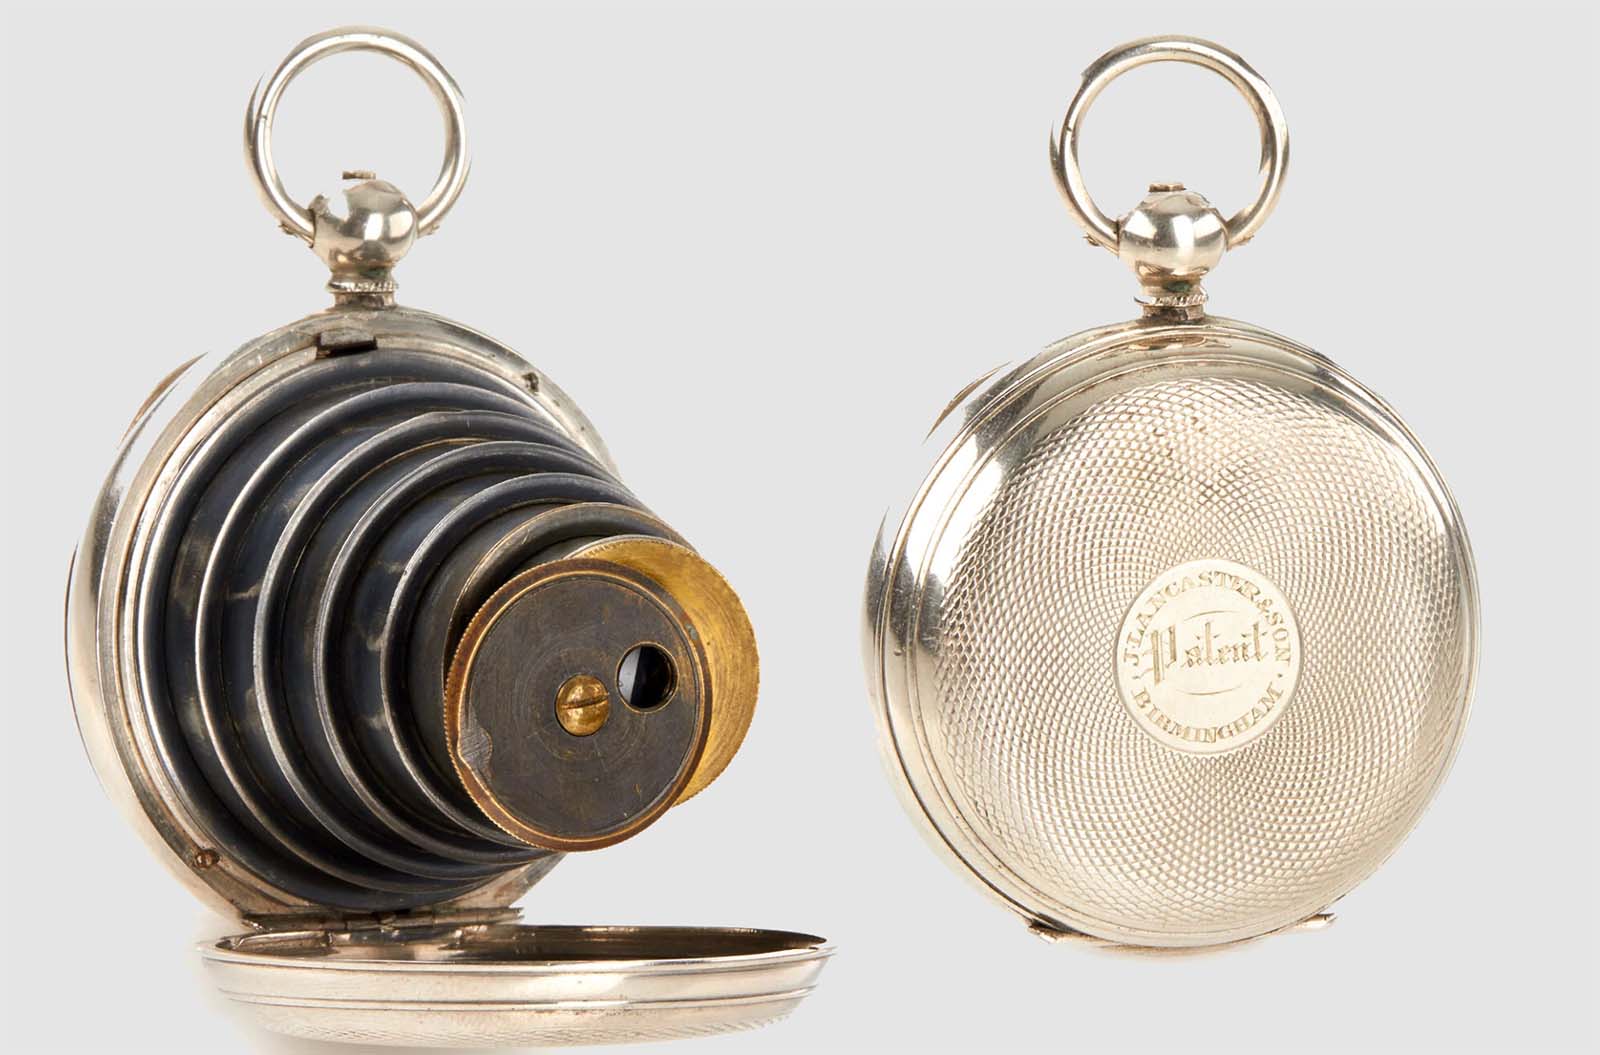 The 1893 Lancaster Watch Camera: A Pocket-Sized Spy Tool of the Victorian Age